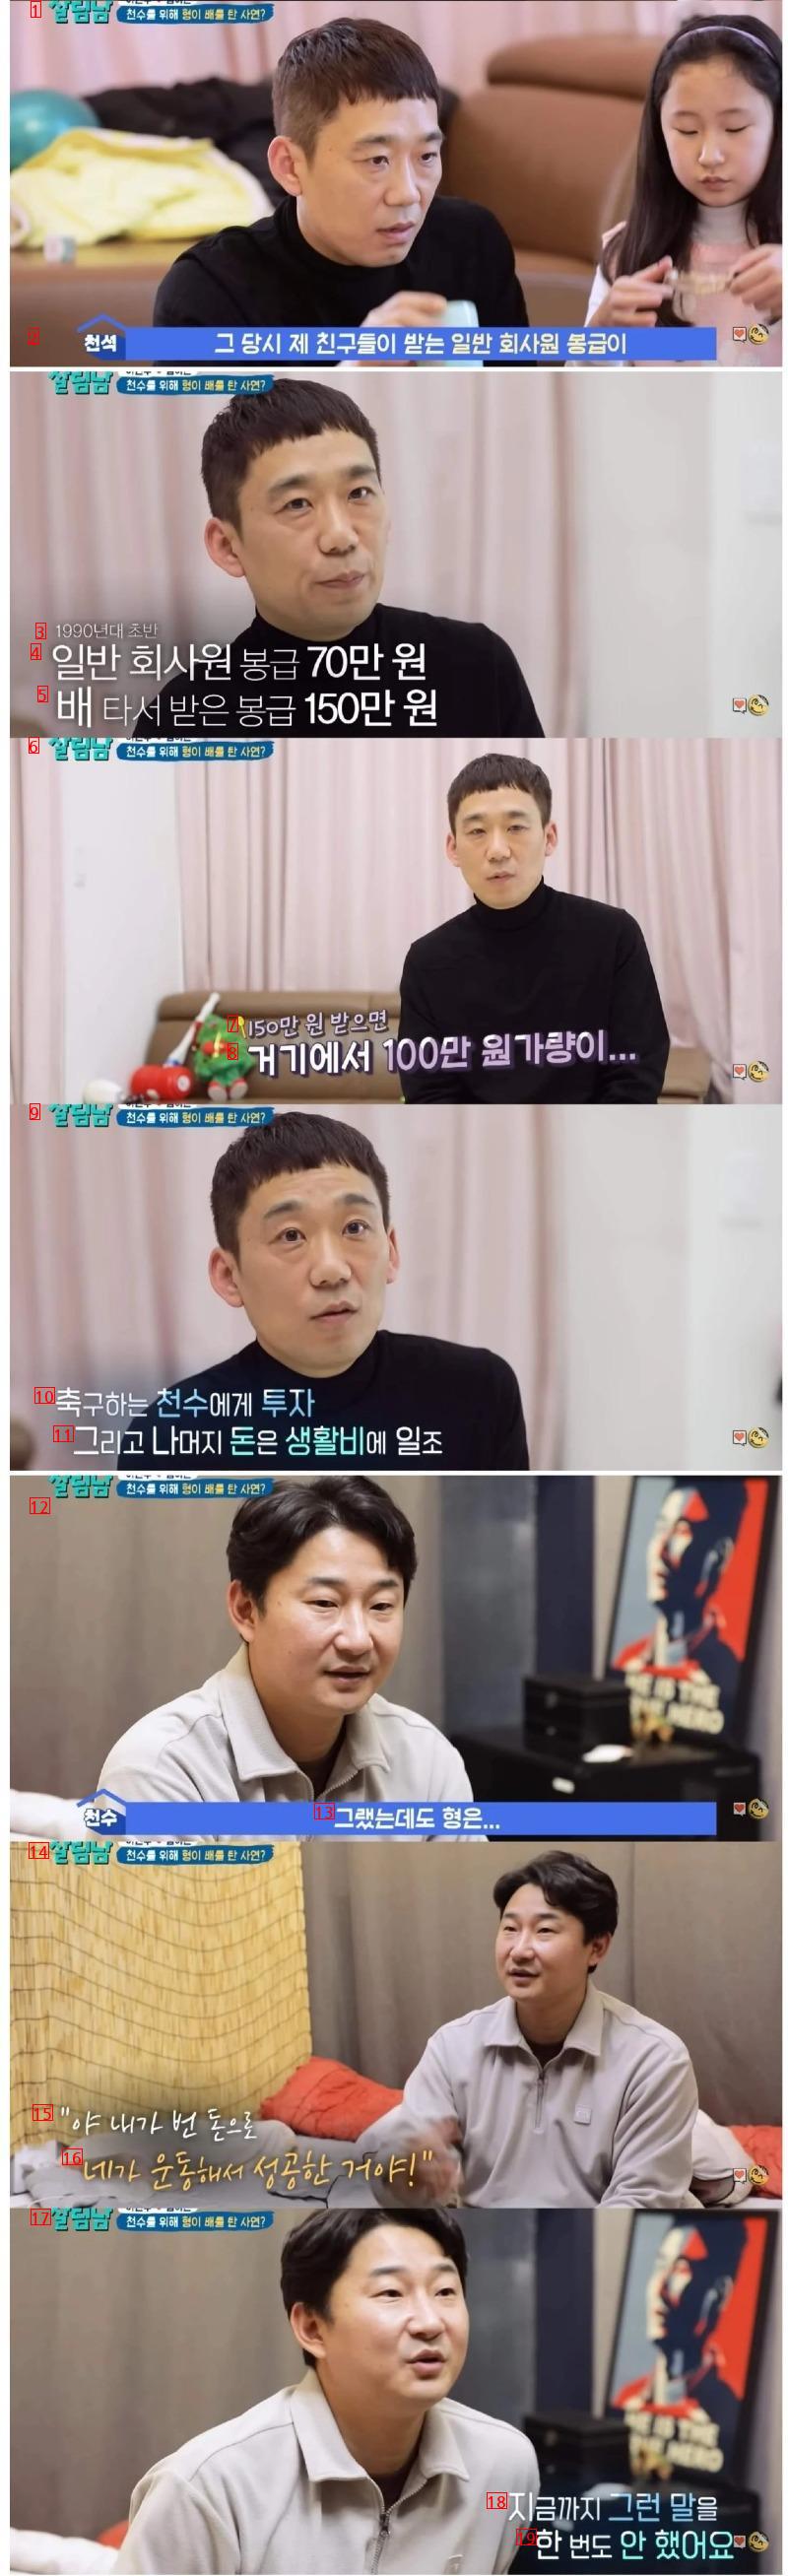 Lee Chun-soo became a famous soccer player because of his brother